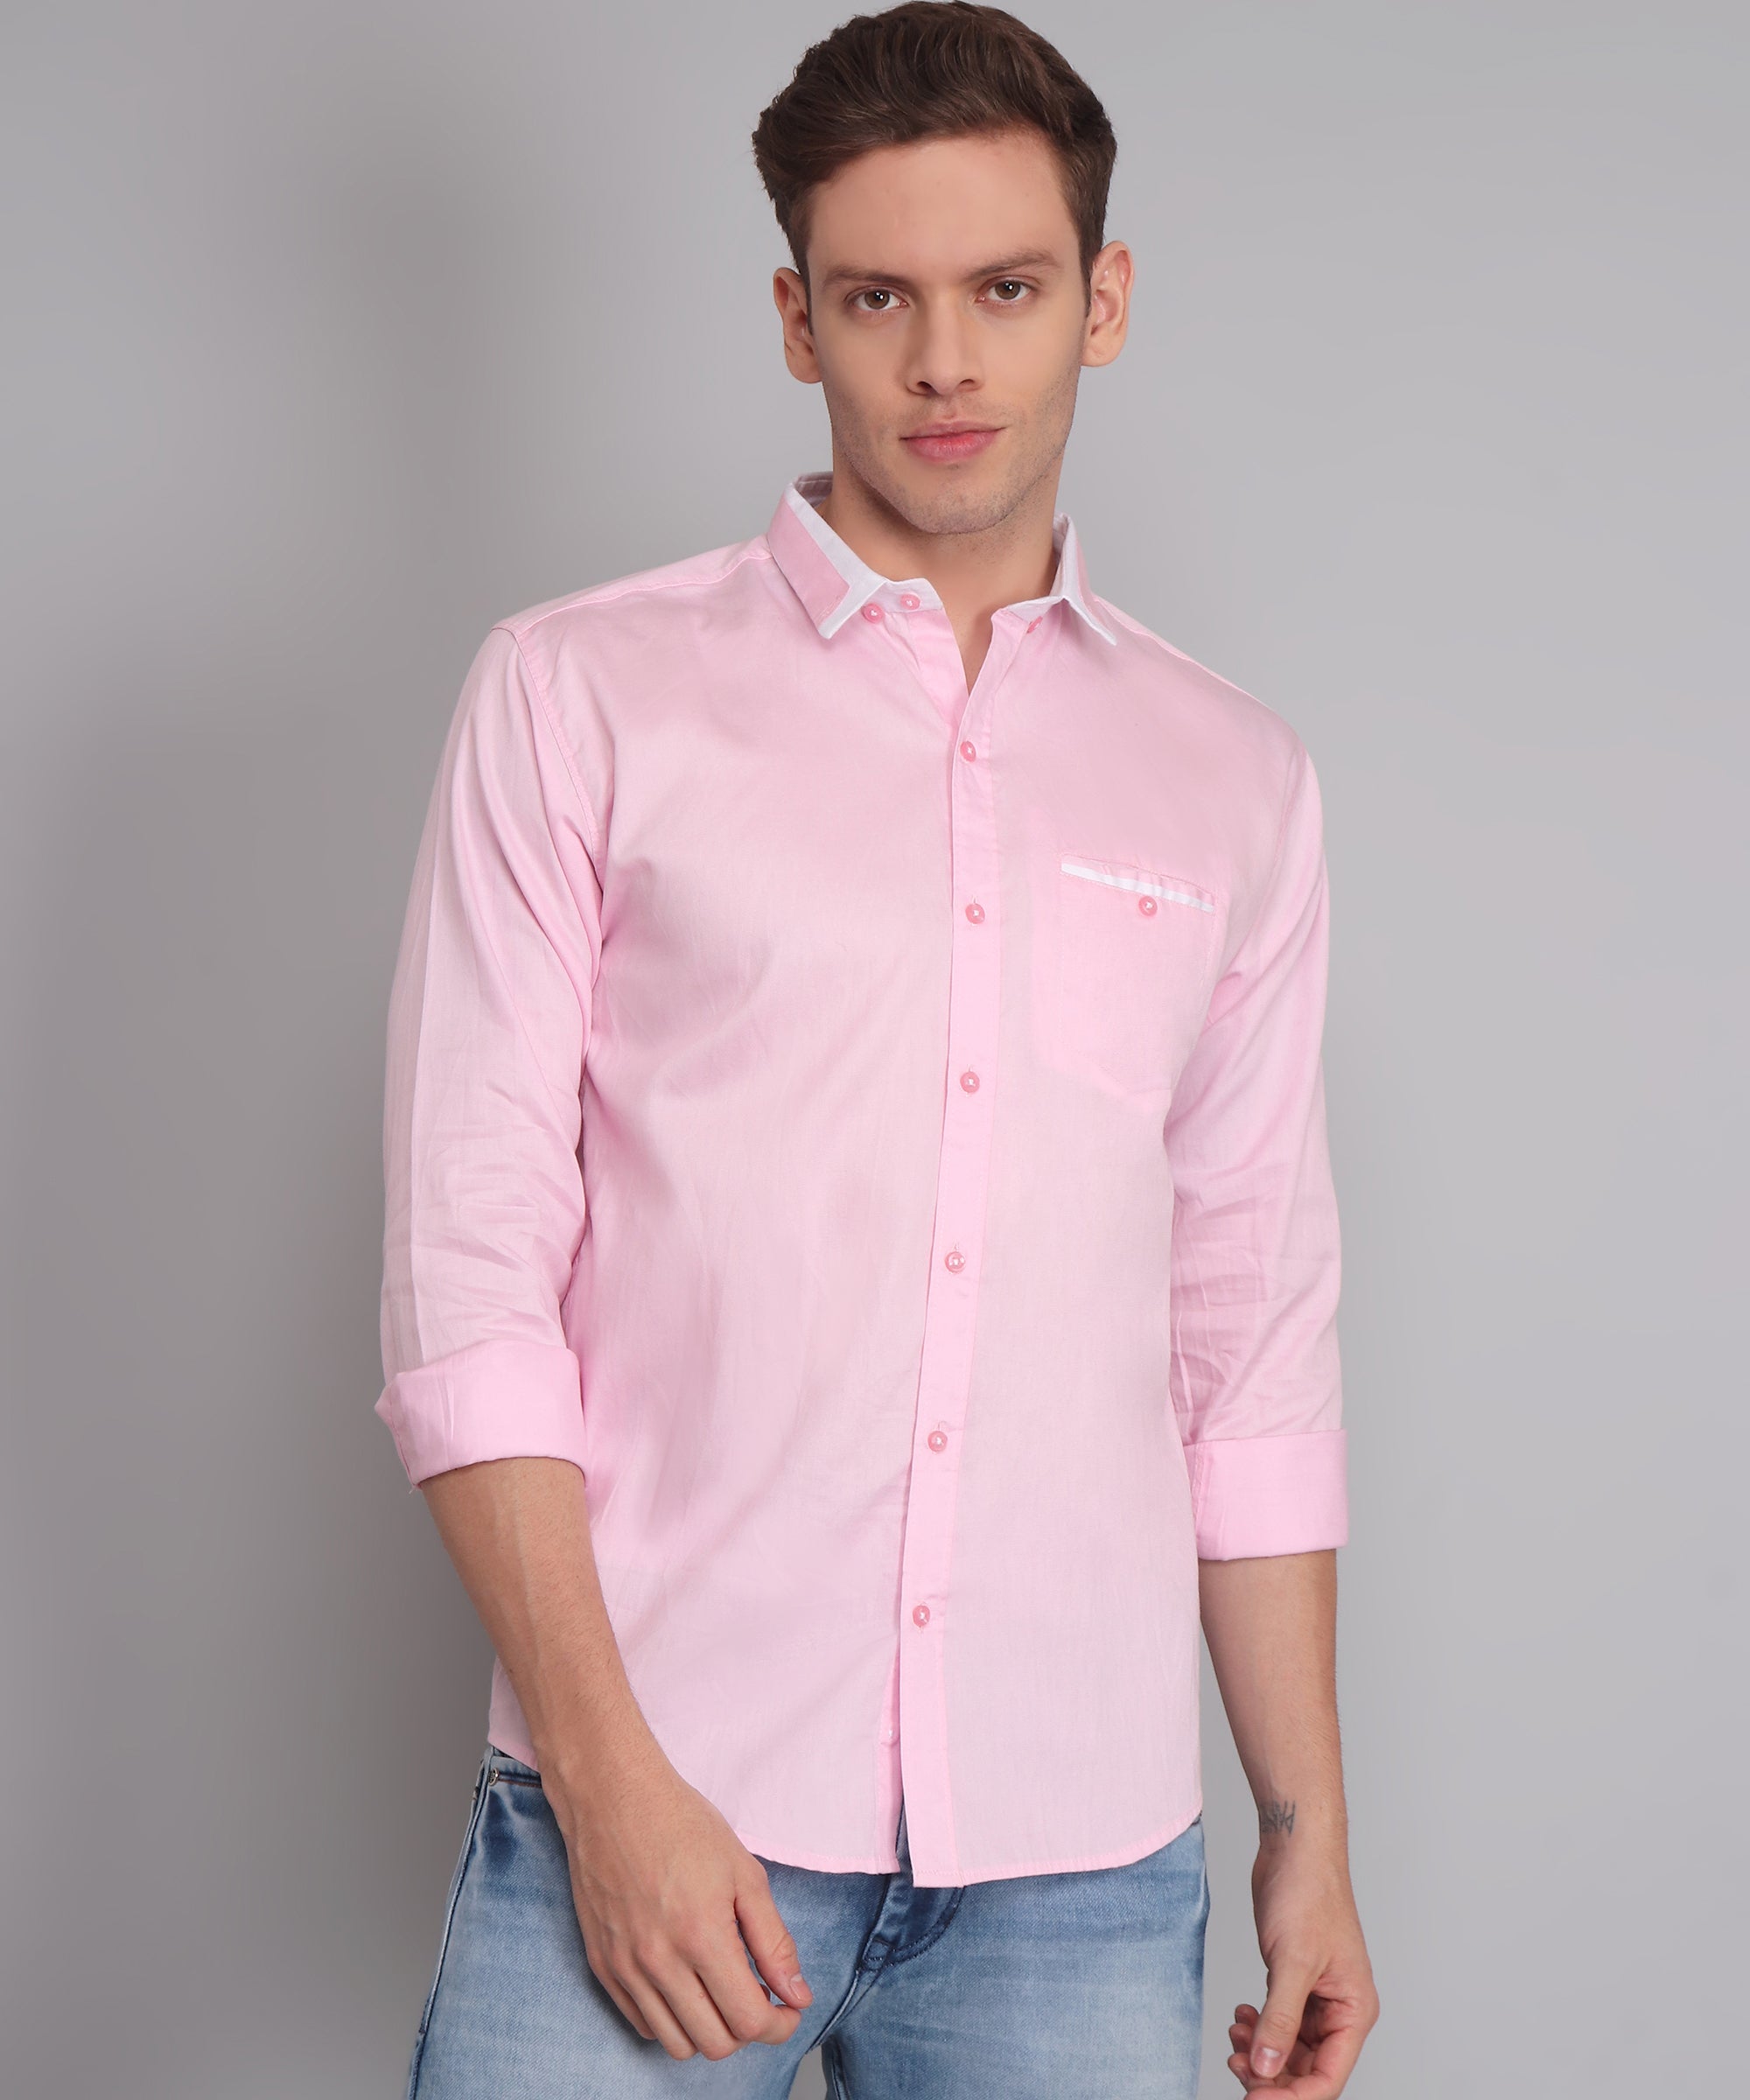 Blushing Elegance: The Timeless Appeal of the Pink Linen Stylish Shirt for Men